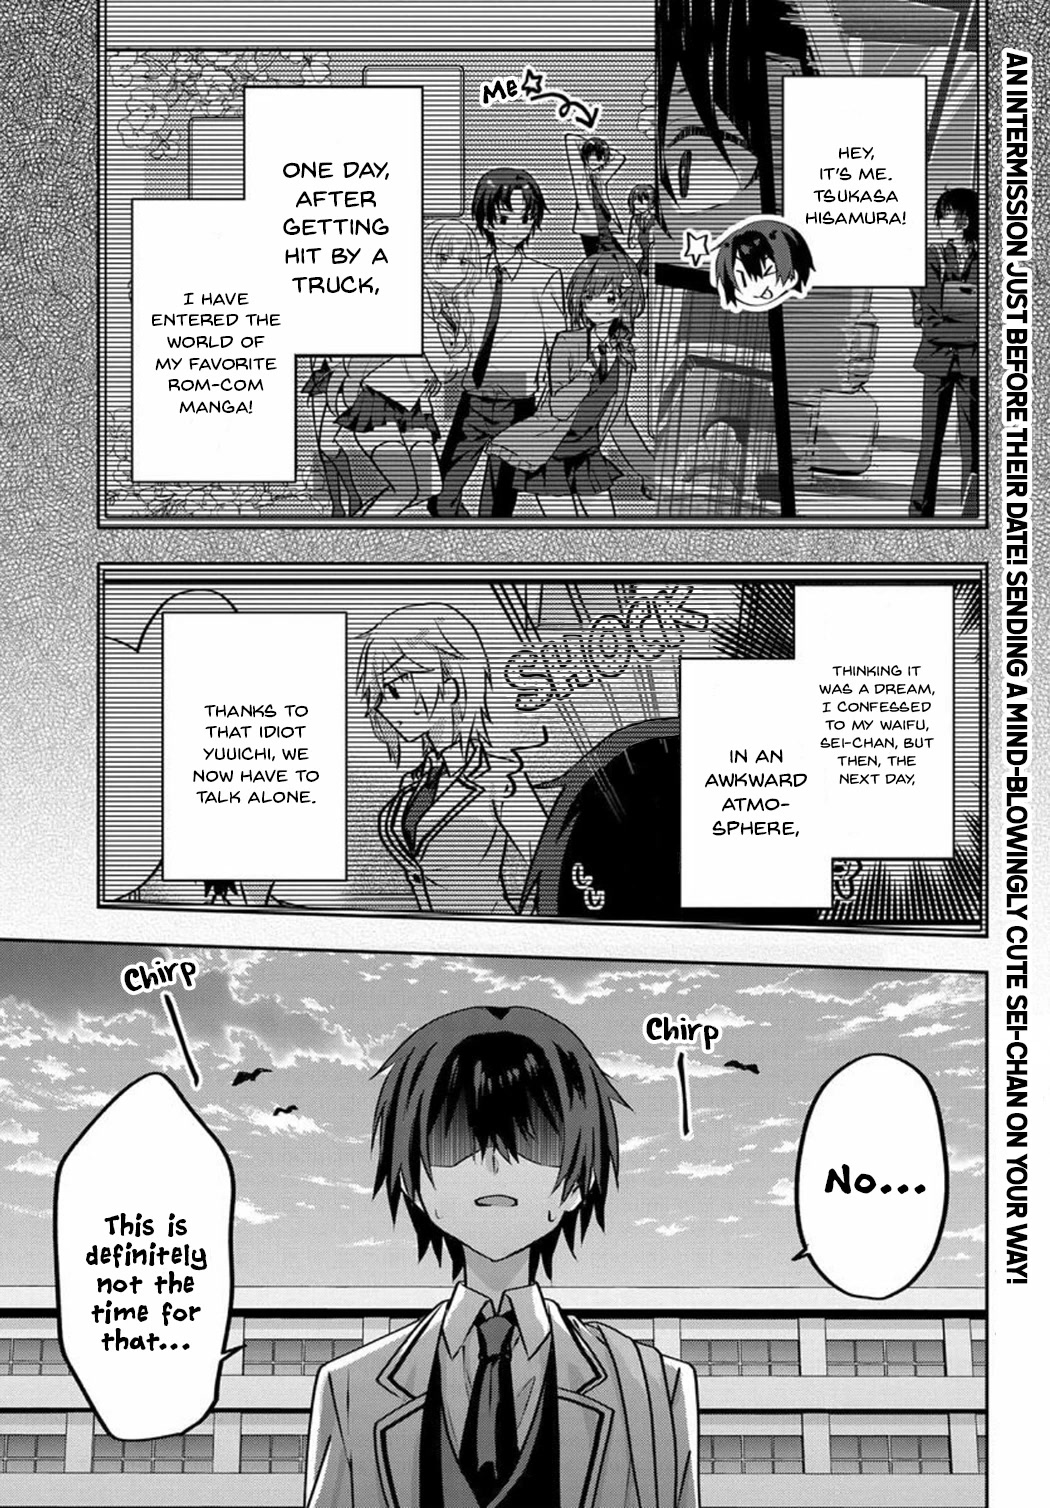 Since I’Ve Entered The World Of Romantic Comedy Manga, I’Ll Do My Best To Make The Losing Heroine Happy Chapter 3.5 #1